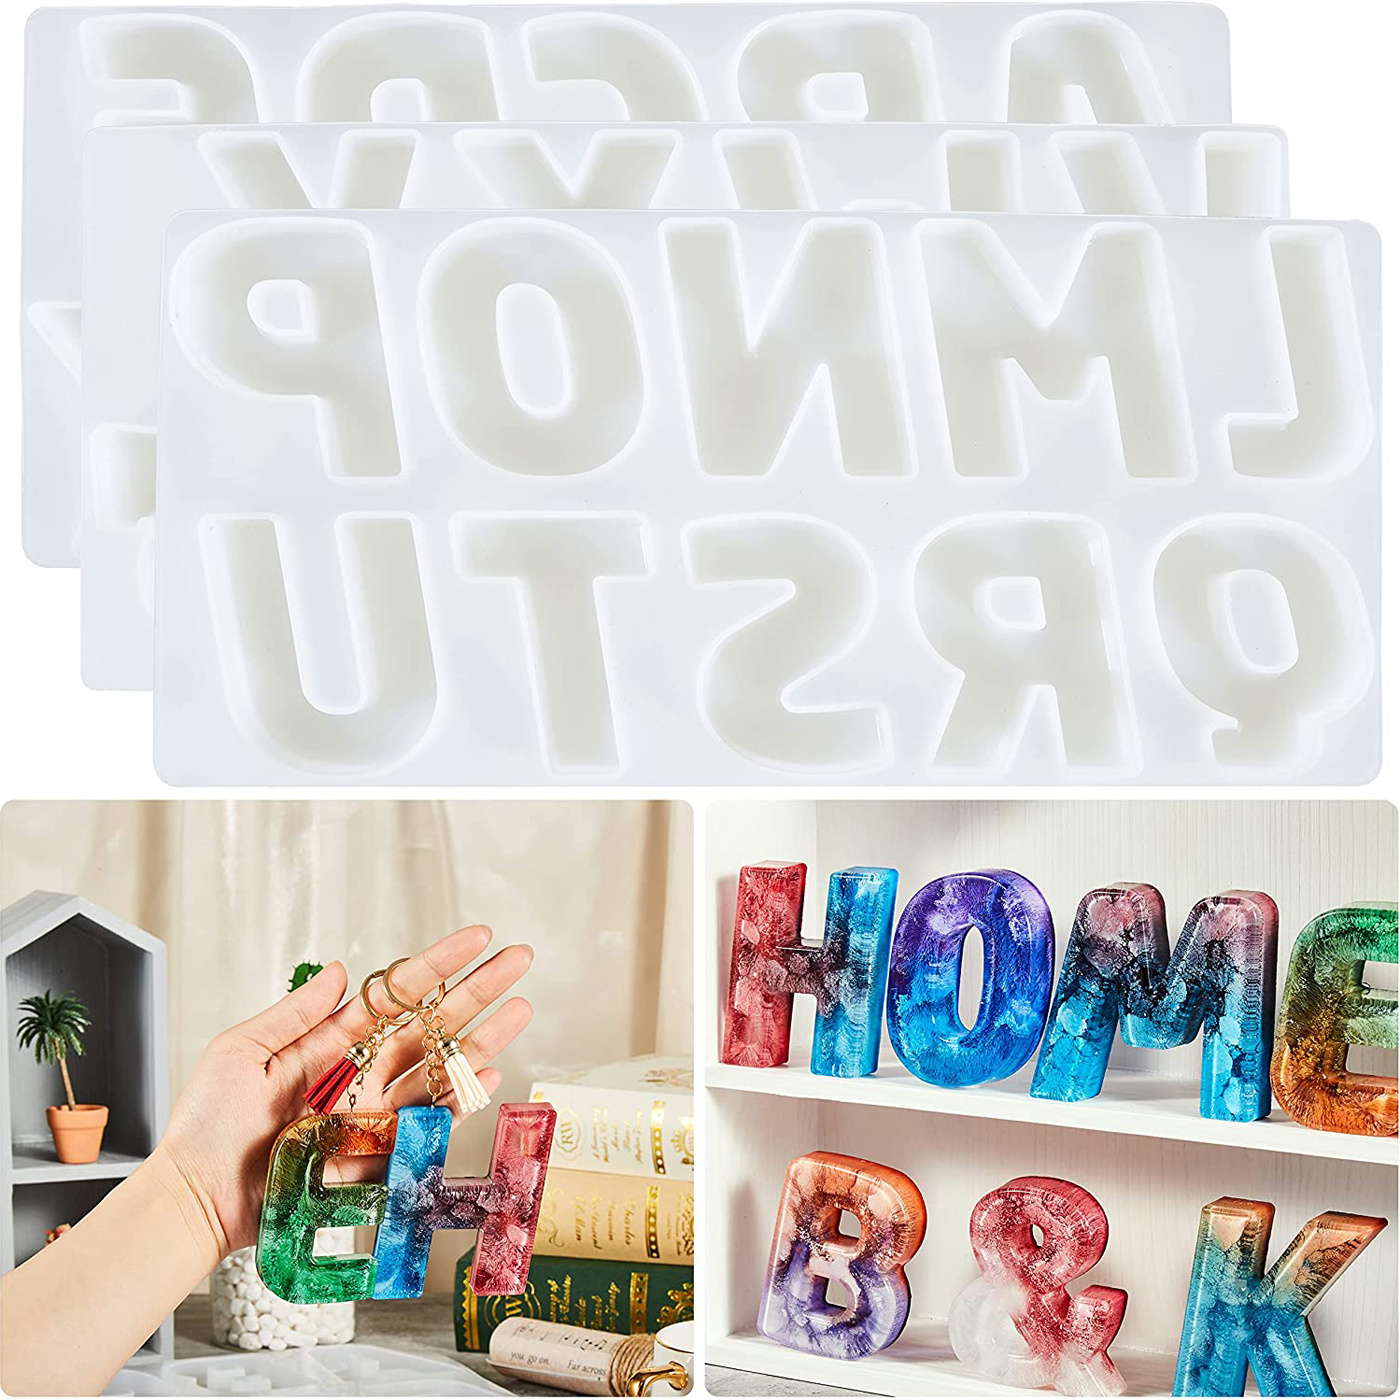 3 Pack Mini Letter Mold Alphabet Mold Letter Resin Mold Alphabet Resin  Casting Mold Soap Making Molds Silicone Mold for Candle Home Decorate Mold